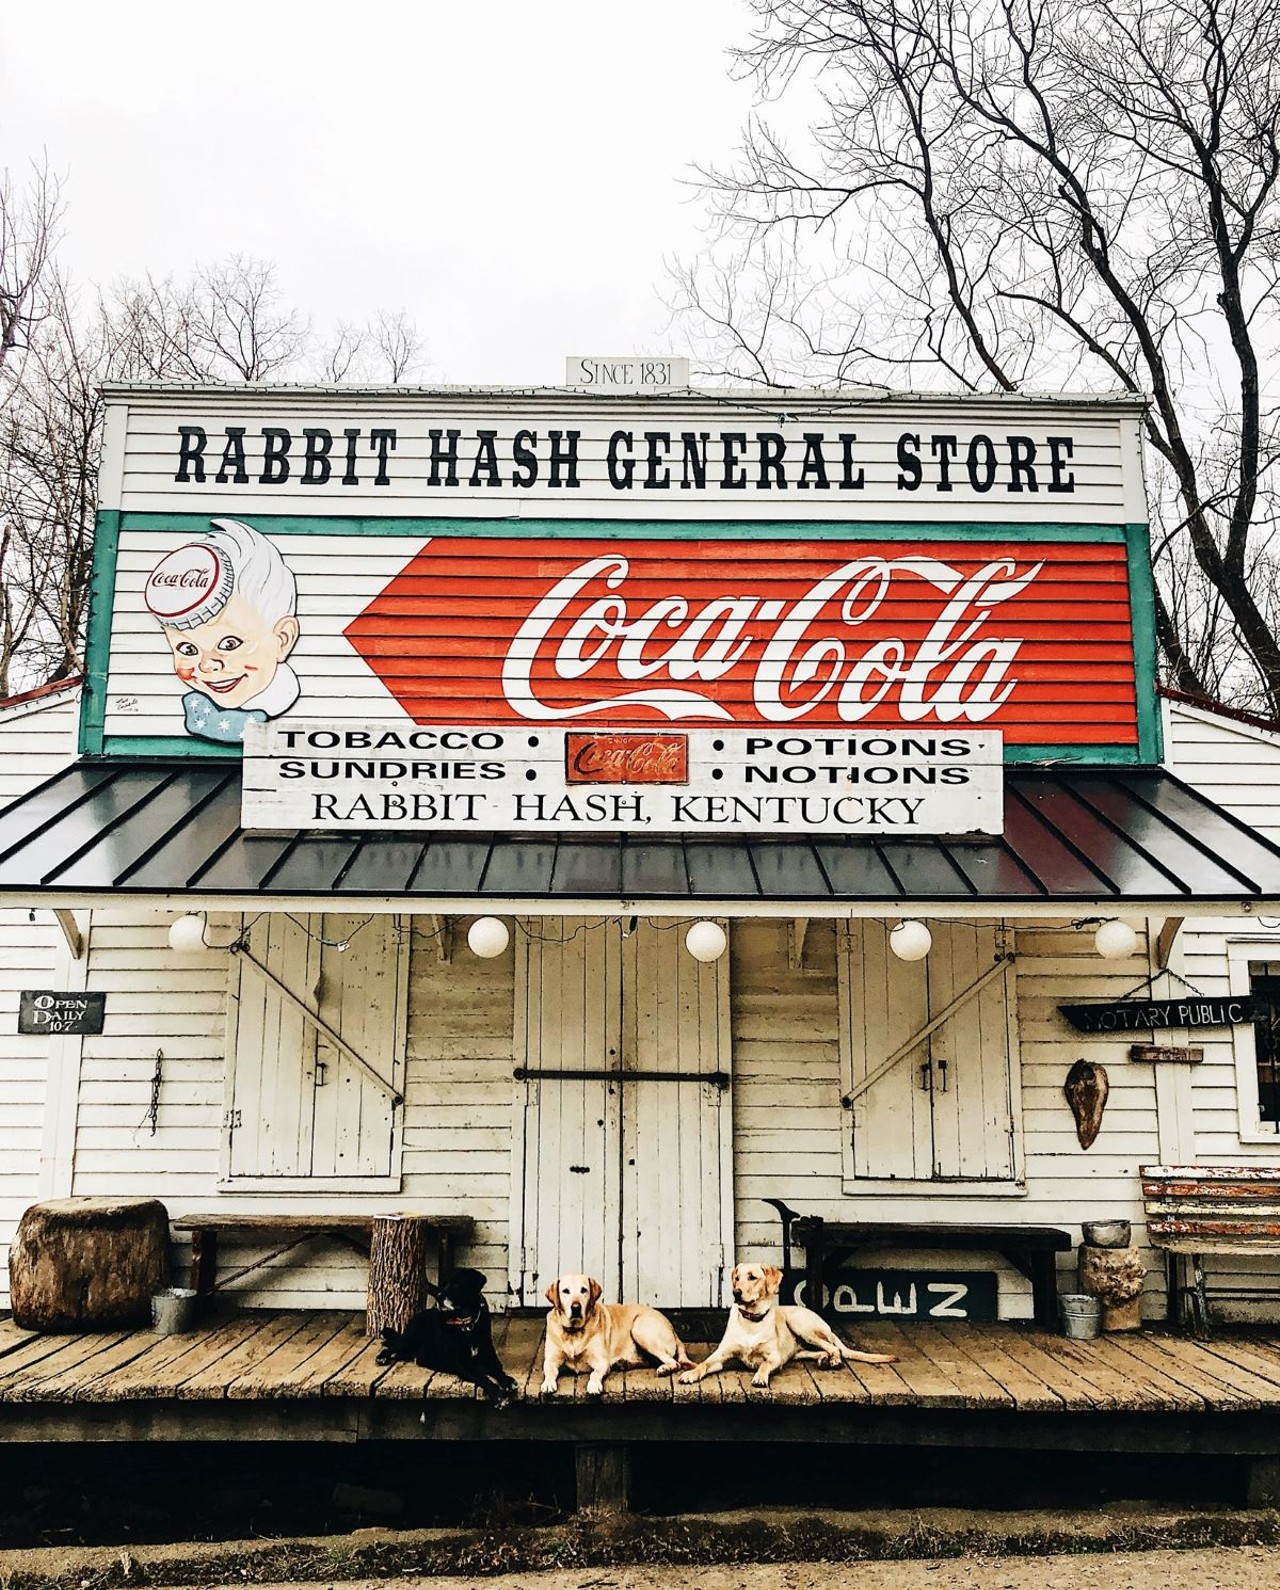 Sunday Music Behind the Stove
When: Jan. 7 at 2 p.m.
Where: Rabbit Hash, Kentucky
What: Live music
Who: Rabbit Hash General Store
Why: Jug band the Cincinnati Dancing Pigs will be there.